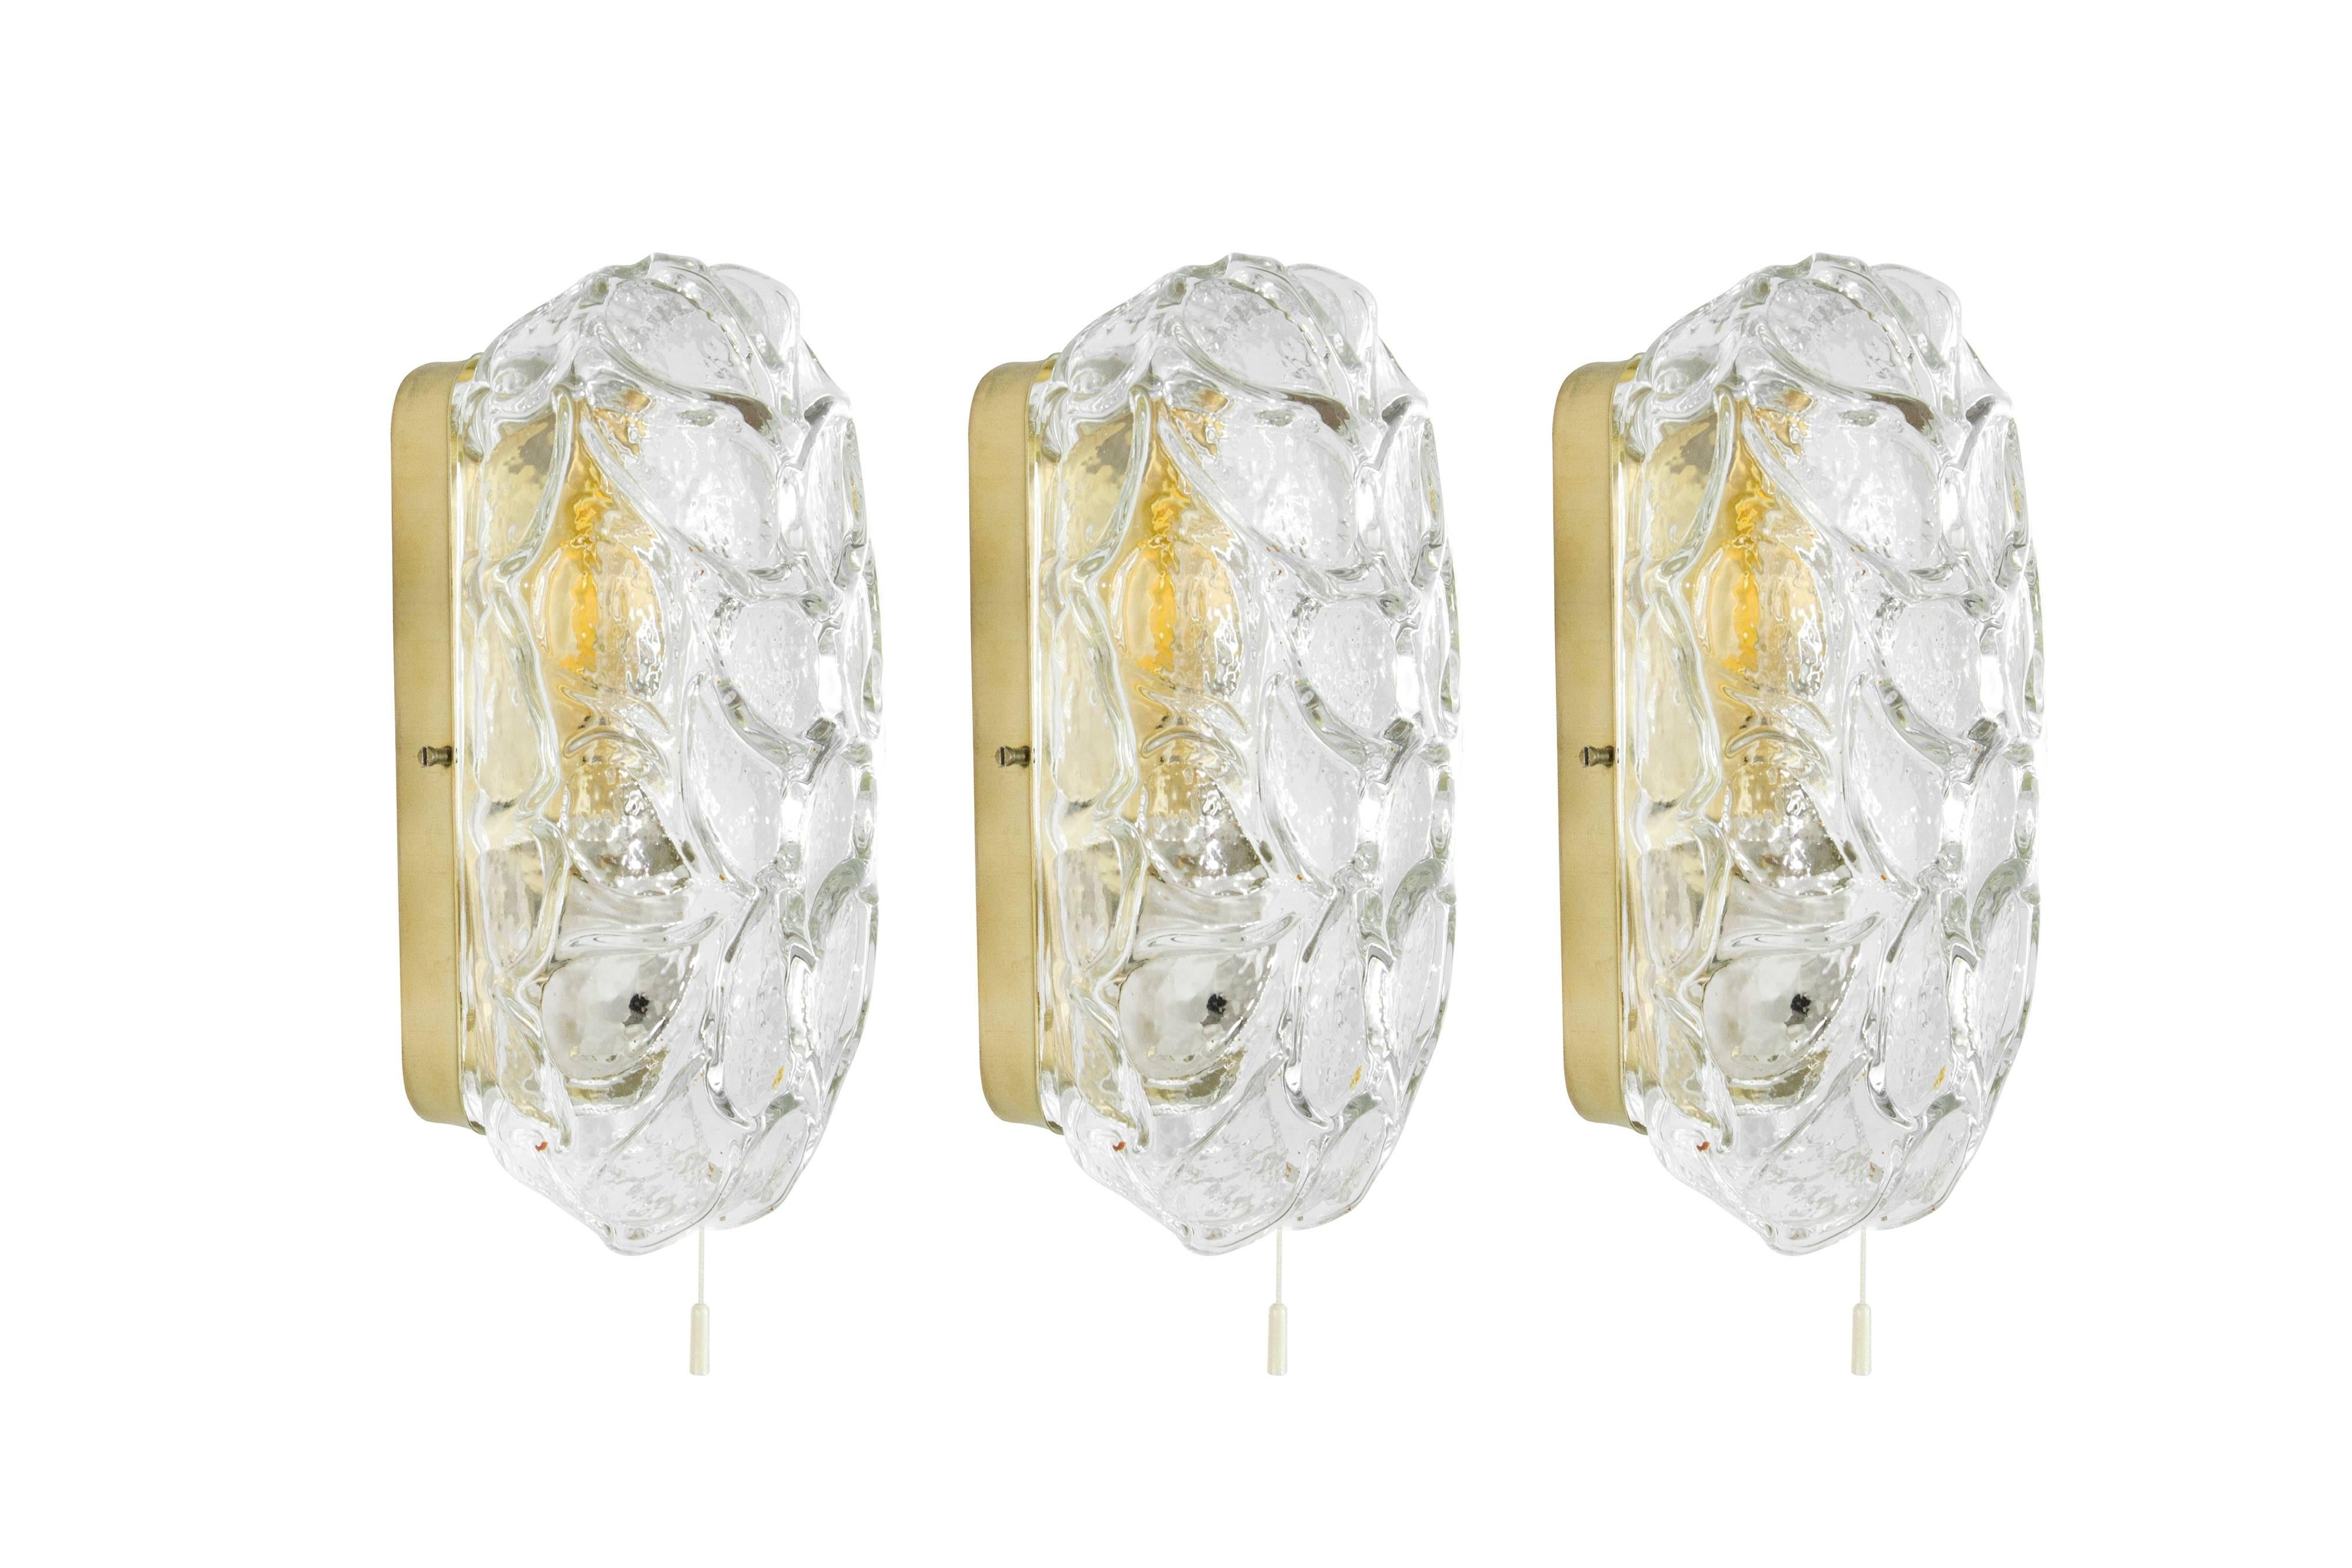 Beautiful and rare set of three bubble glass sconces original from Austria, circa 1960s.

Fully rewired.